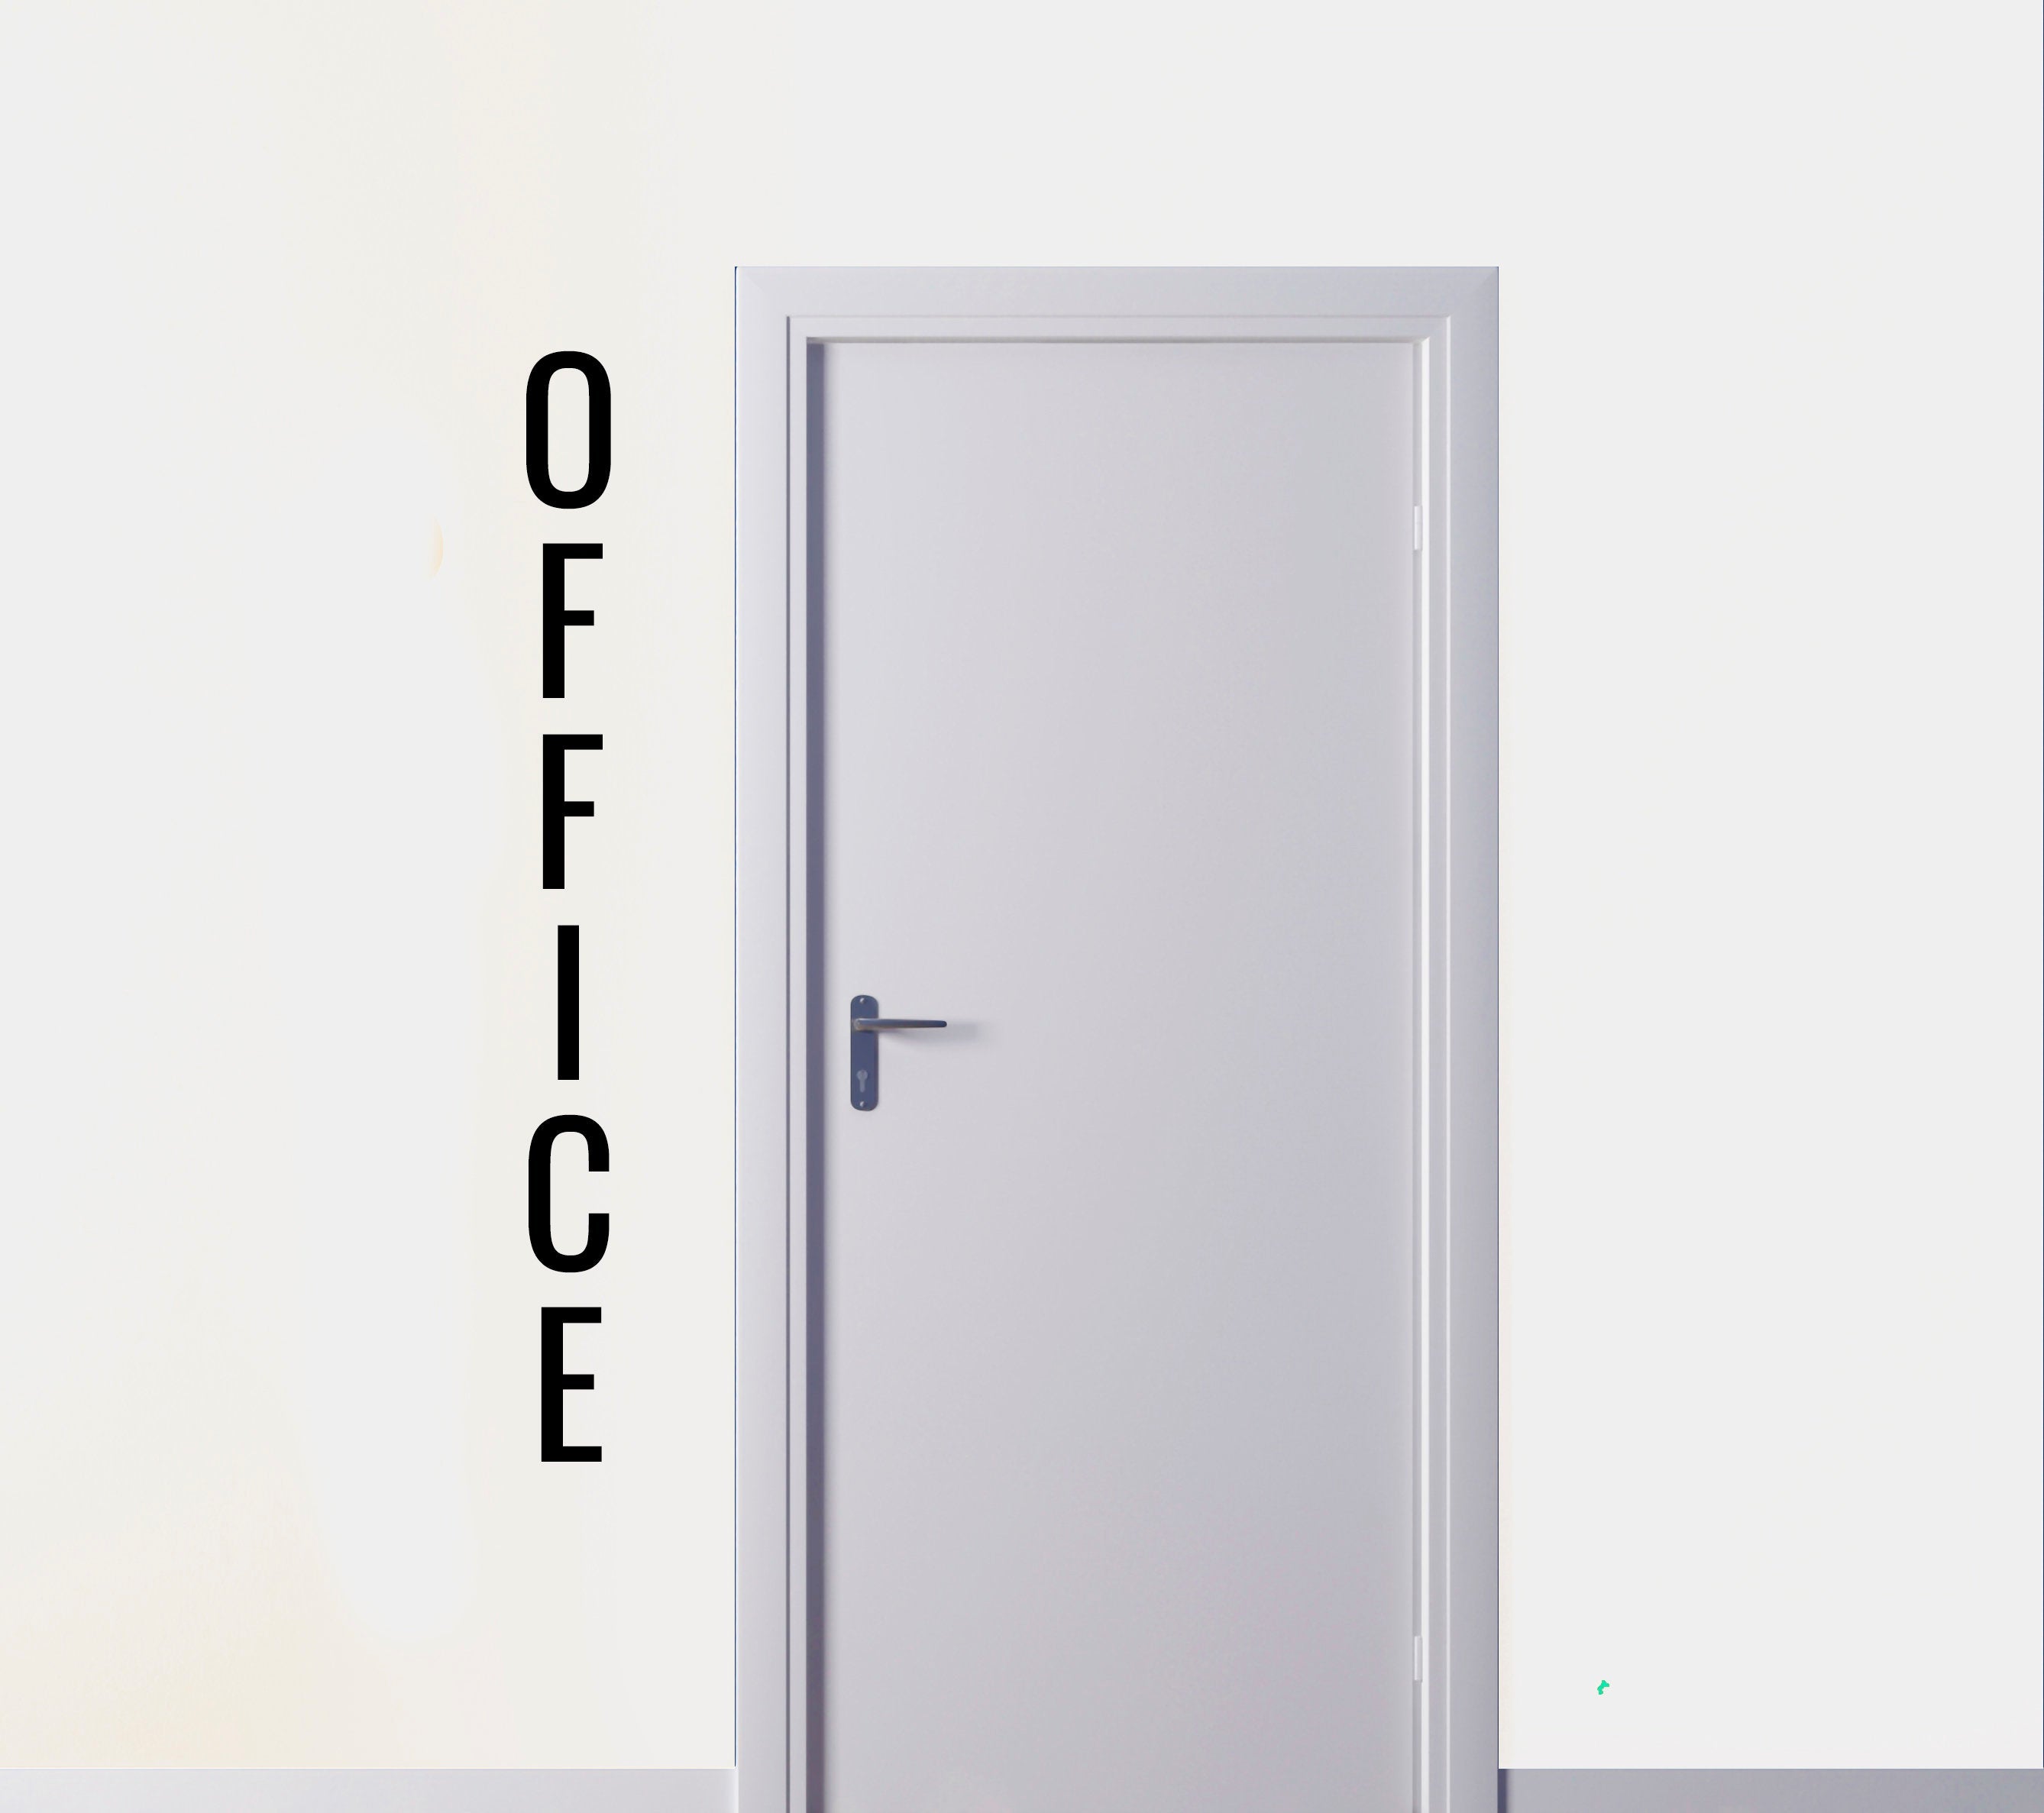 Vertical Office Sign - Vinyl Decal for Home Office, Businesses, Studio, Workplace, Workspace, Etc!